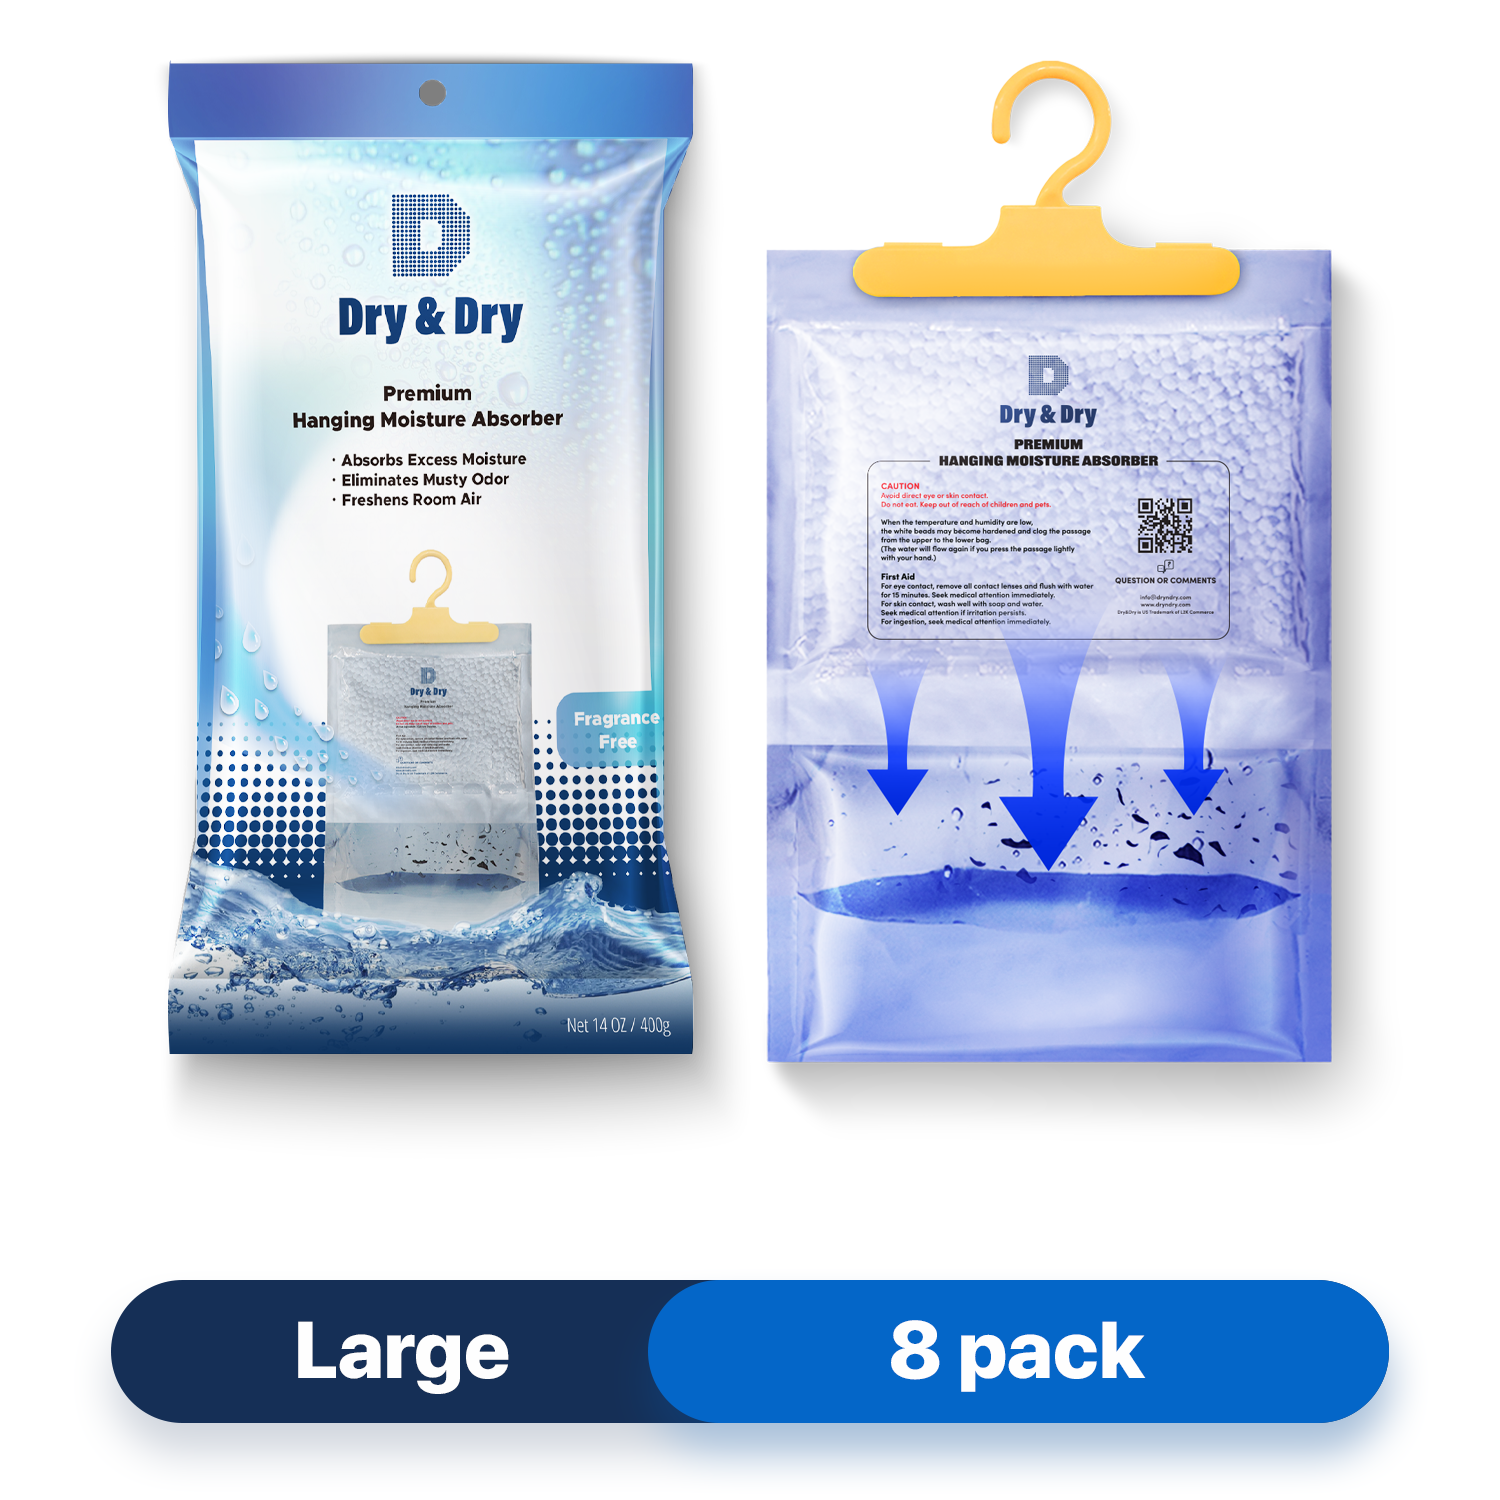 [8 pack] [Net 14 oz/Pack] “Dry & Dry” Premium Hanging Moisture Absorber to Control Excess Moisture for Basements, Bathrooms, Laundry Rooms, and Enclosed Spaces